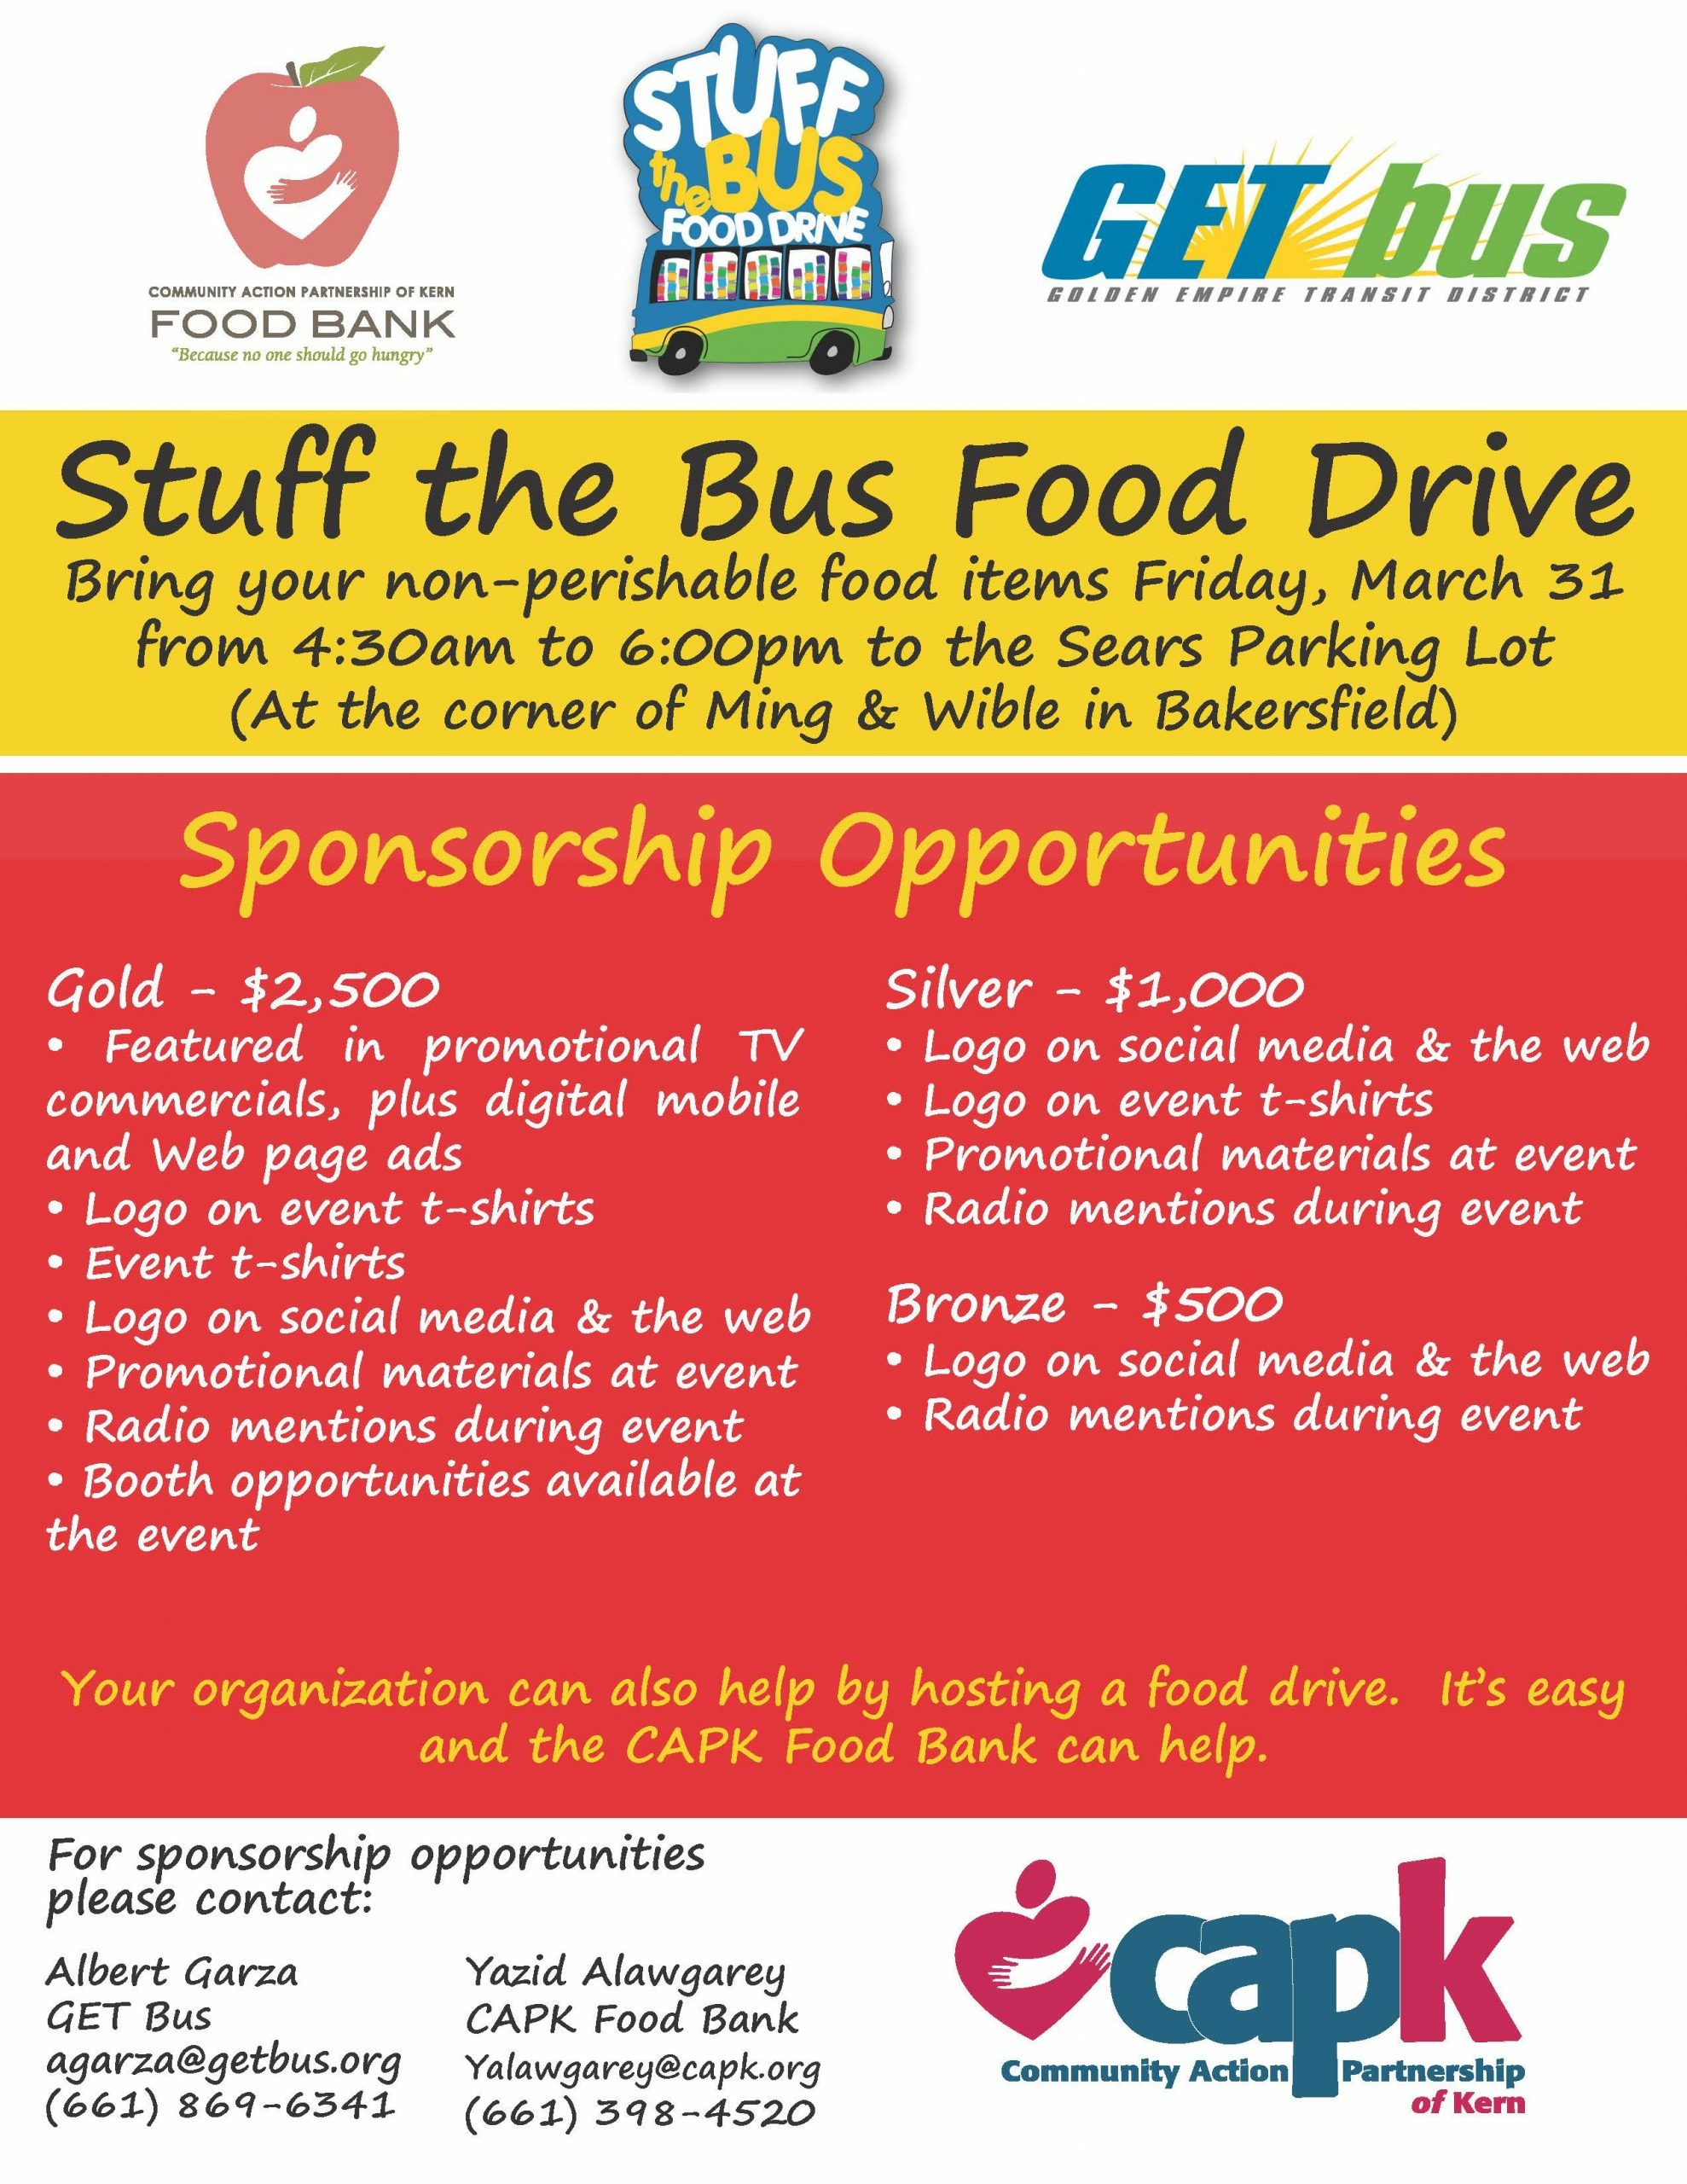 'Pack the Bus' food drive event returns in August - WBBJ TV